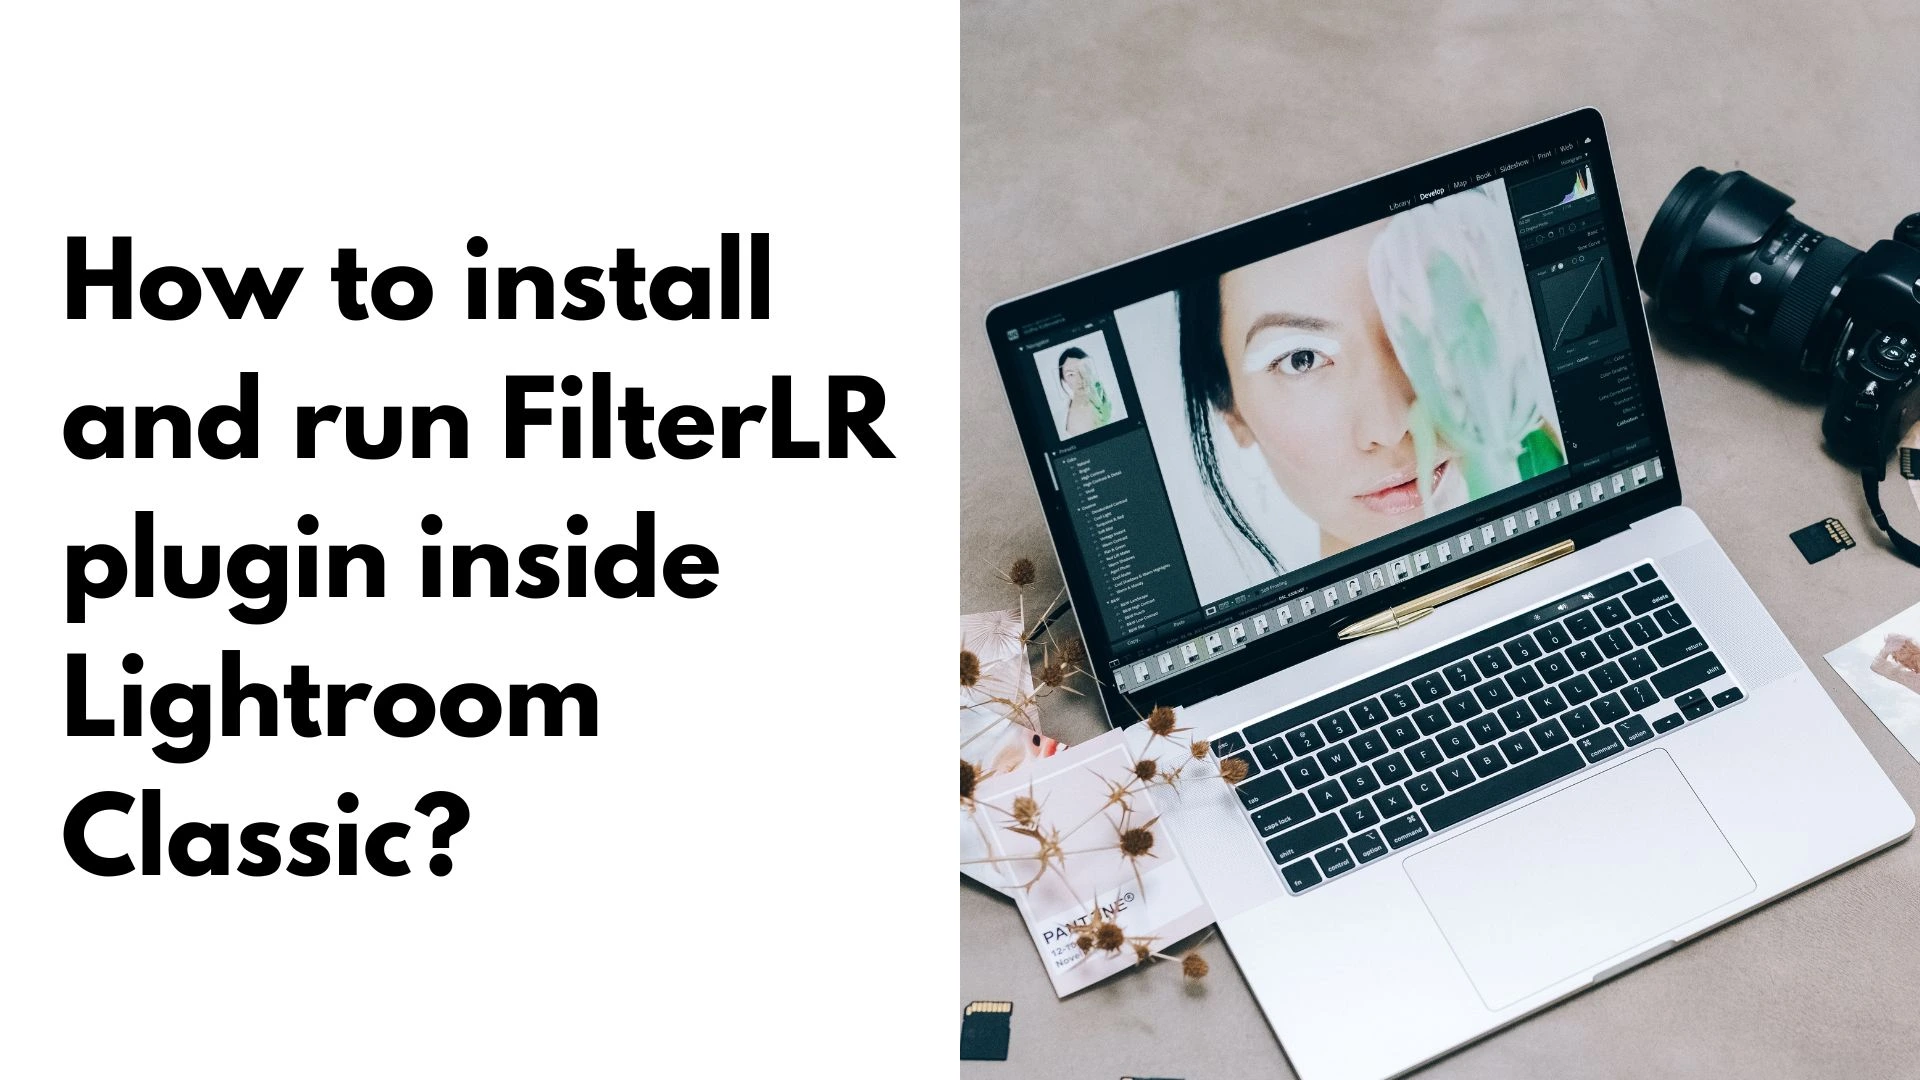 How to install and run FilterLR plugin inside Lightroom Classic?